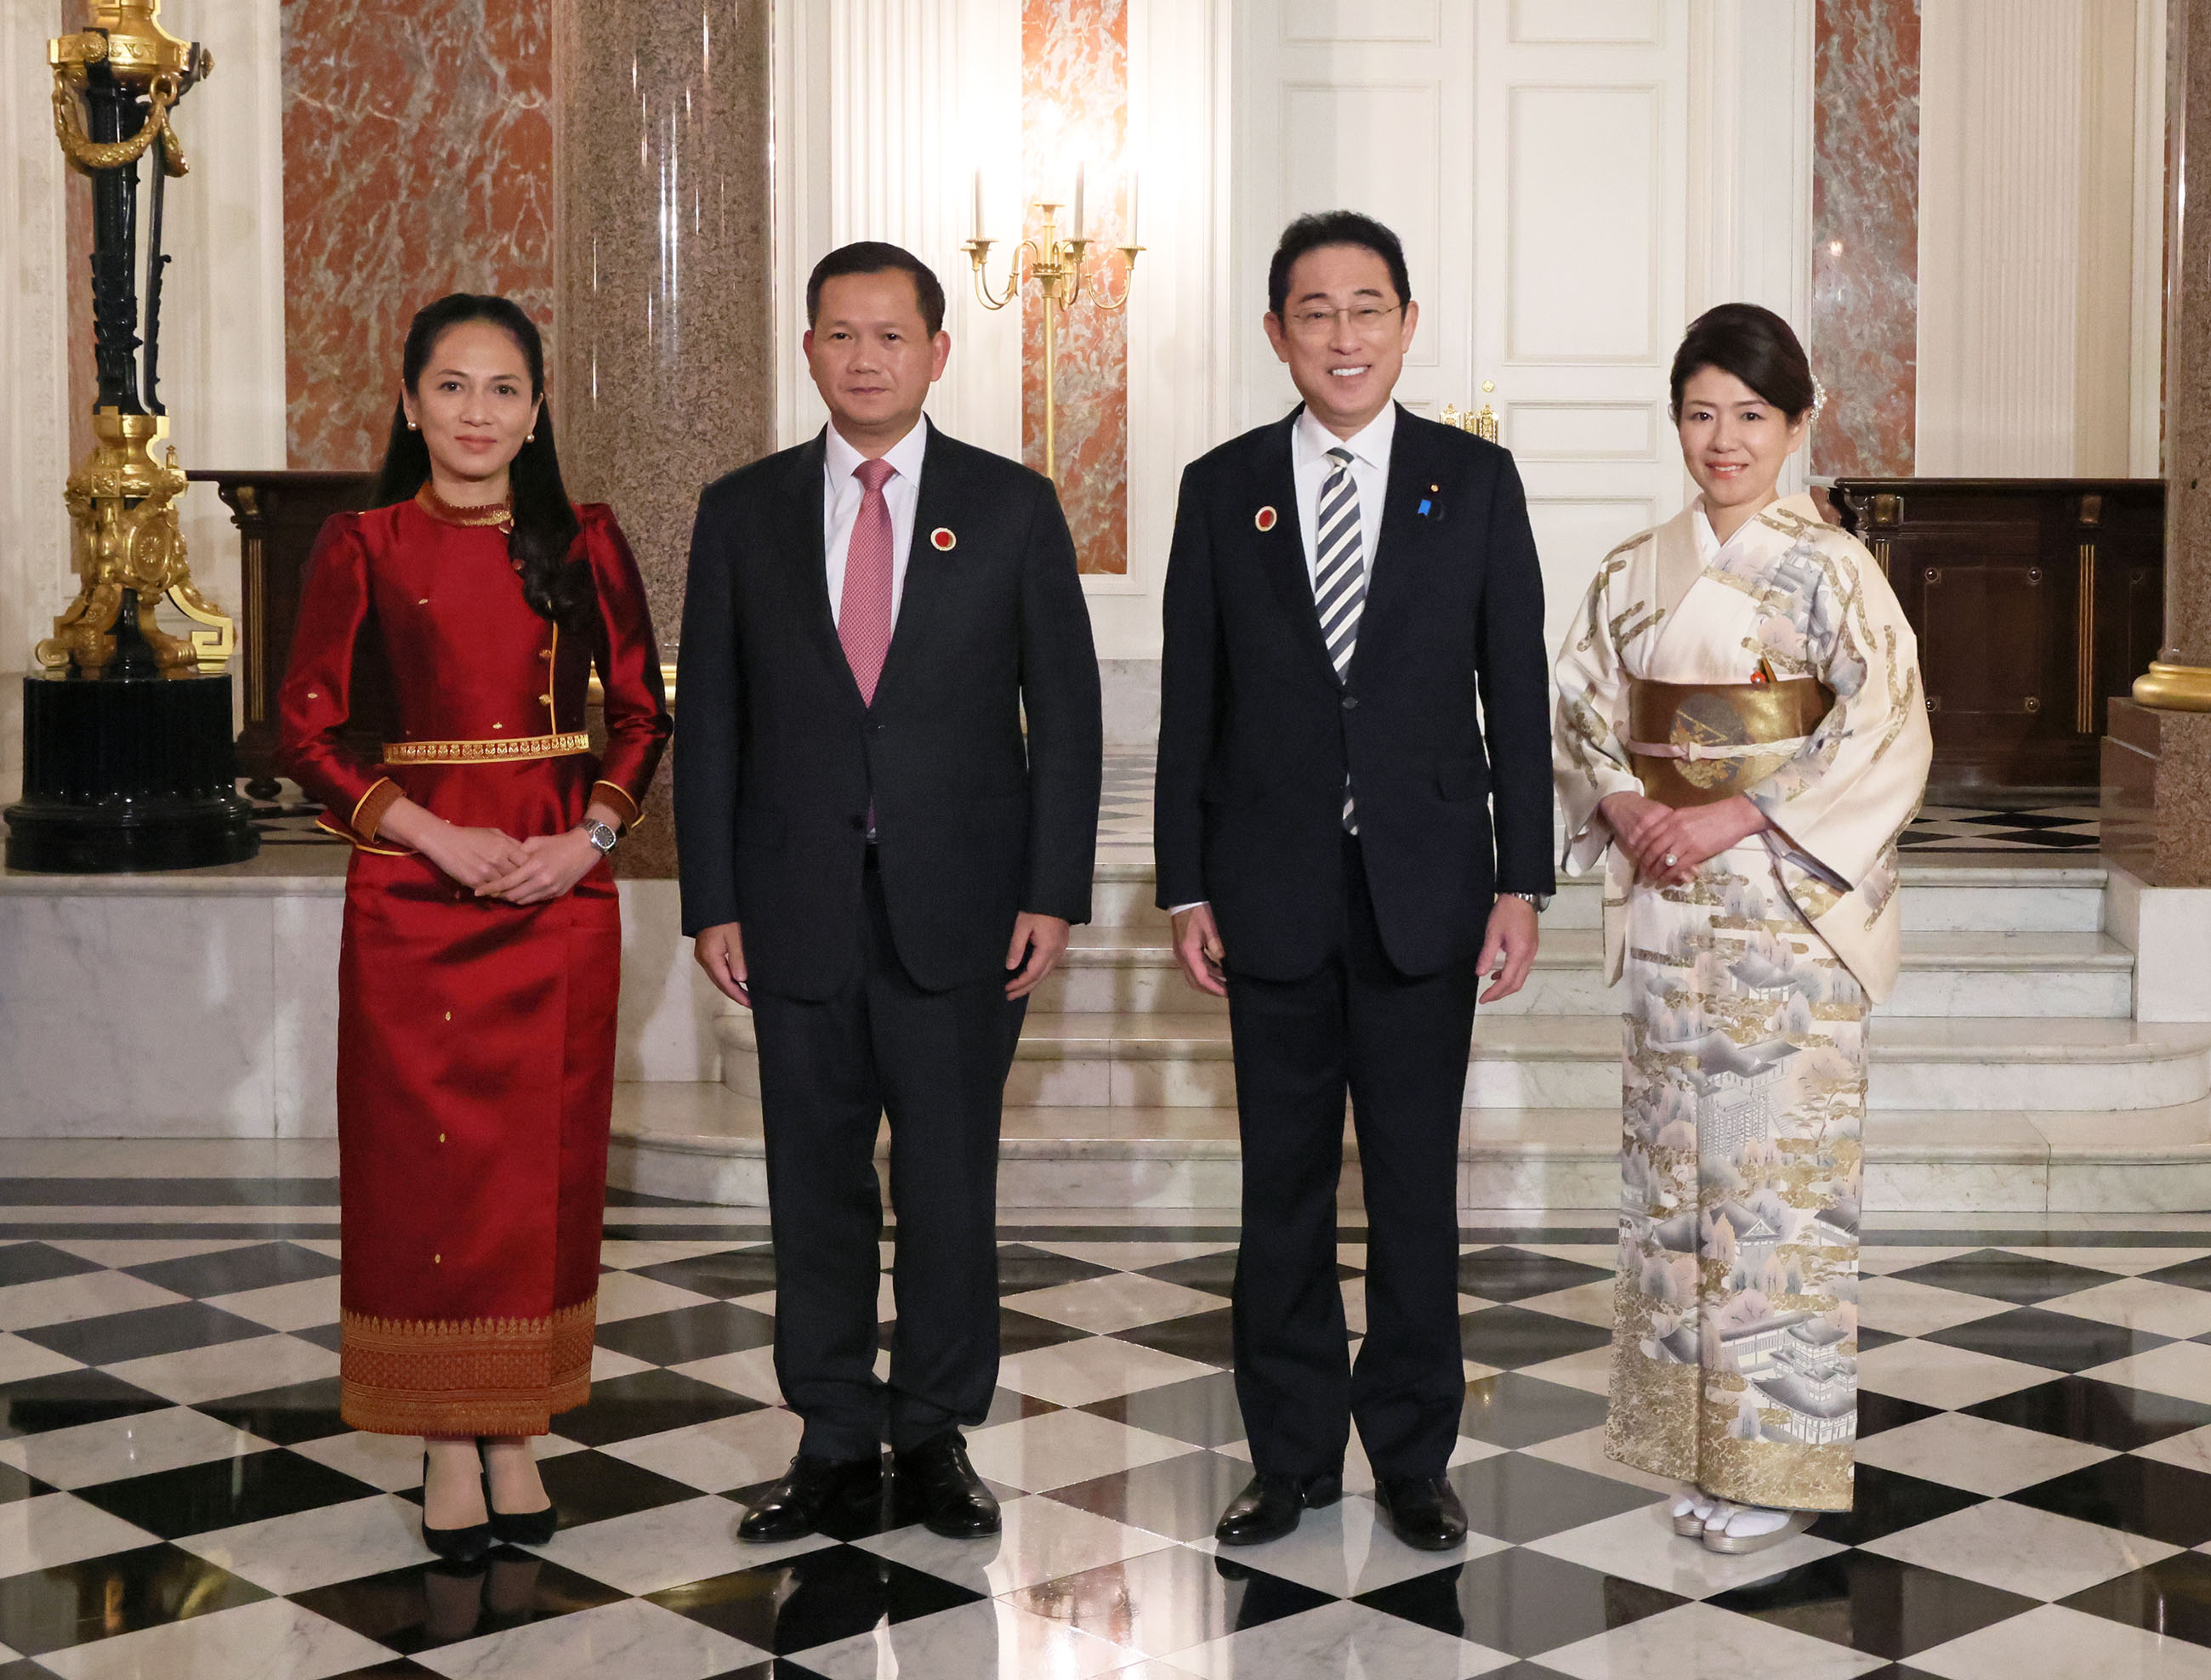 Prime Minister Kishida welcoming Prime Minister Hun Manet of the Kingdom of Cambodia and spouse